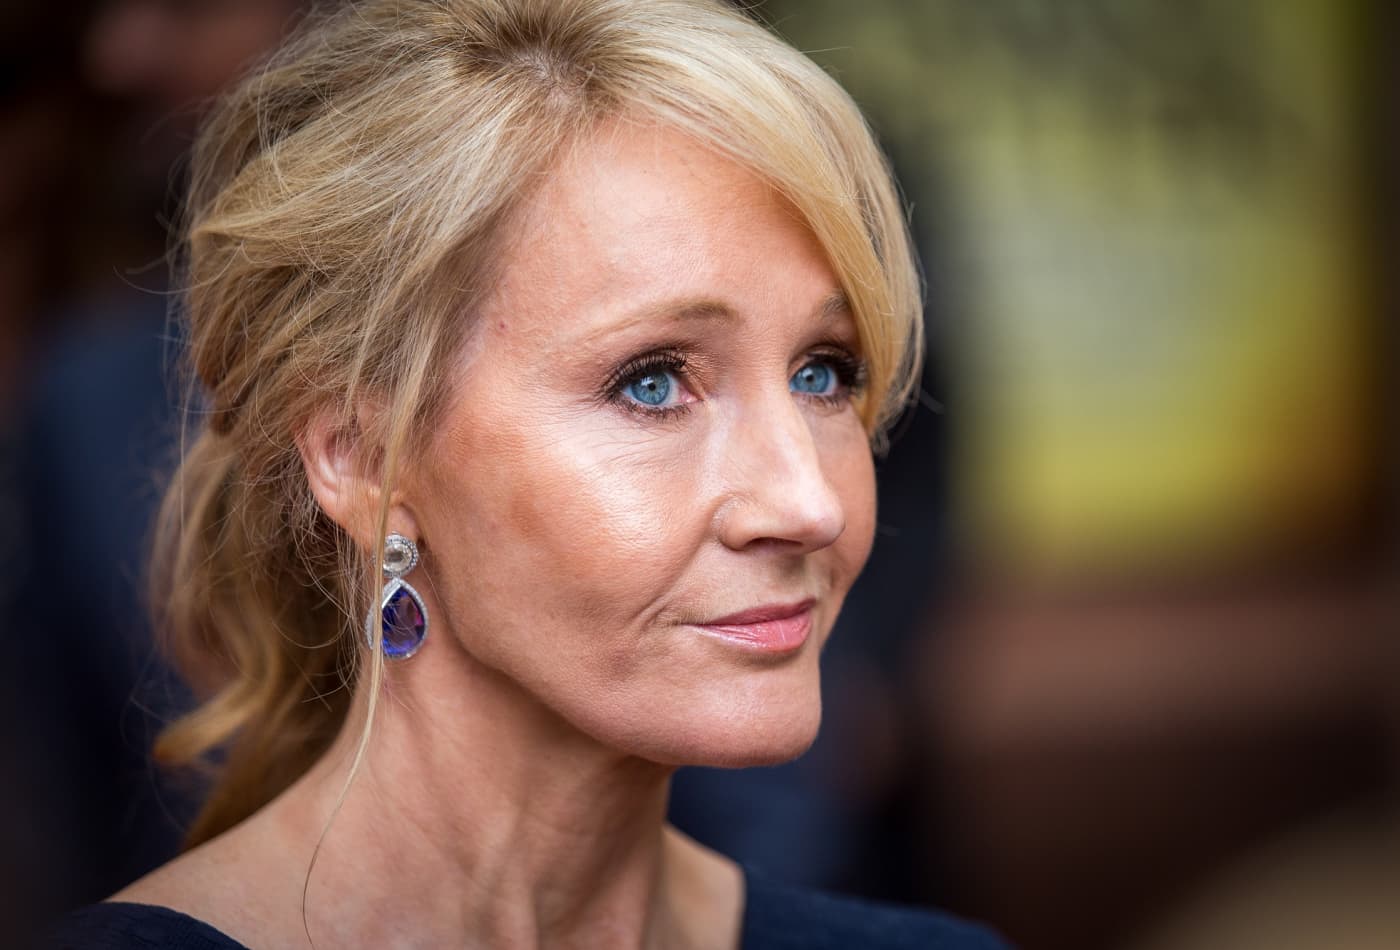 'Harry Potter' author J.K. Rowling offers her best advice for success